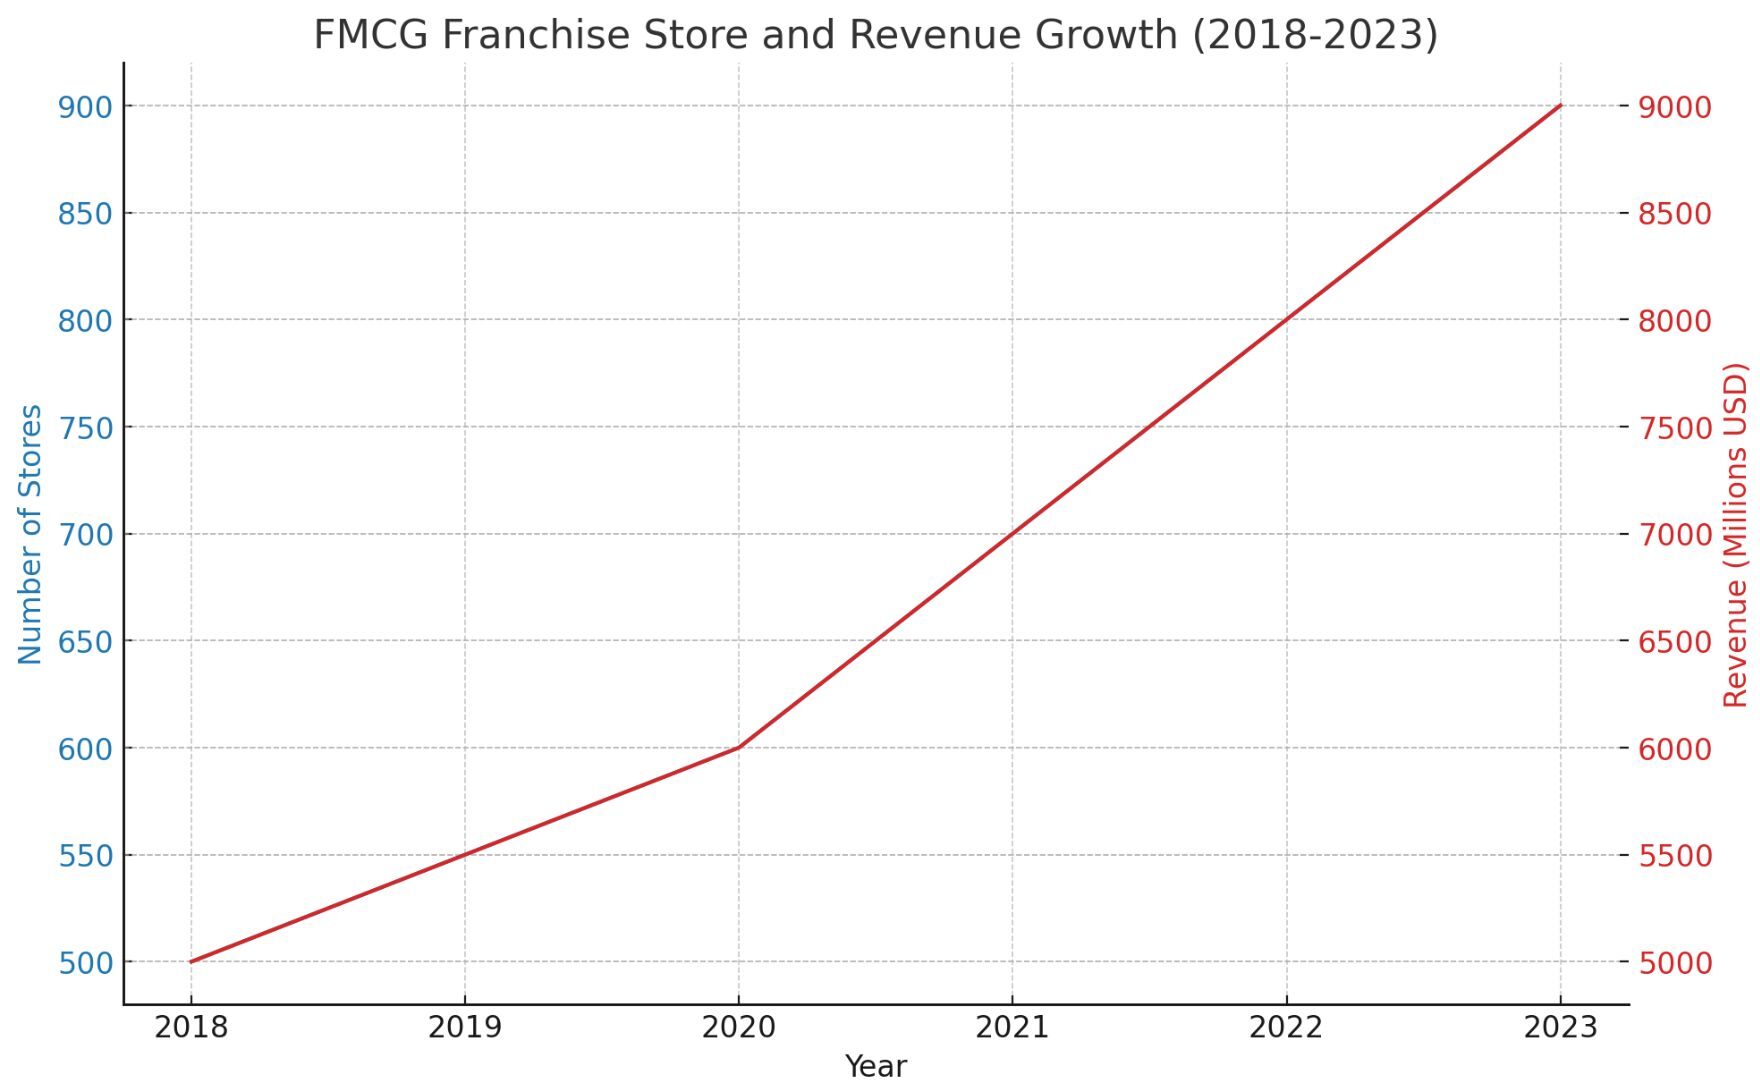 Graph showing the increase in FMCG franchise store counts from 500 in 2018 to 900 in 2023 and revenue growth from $5,000 million to $9,000 million over the same period.